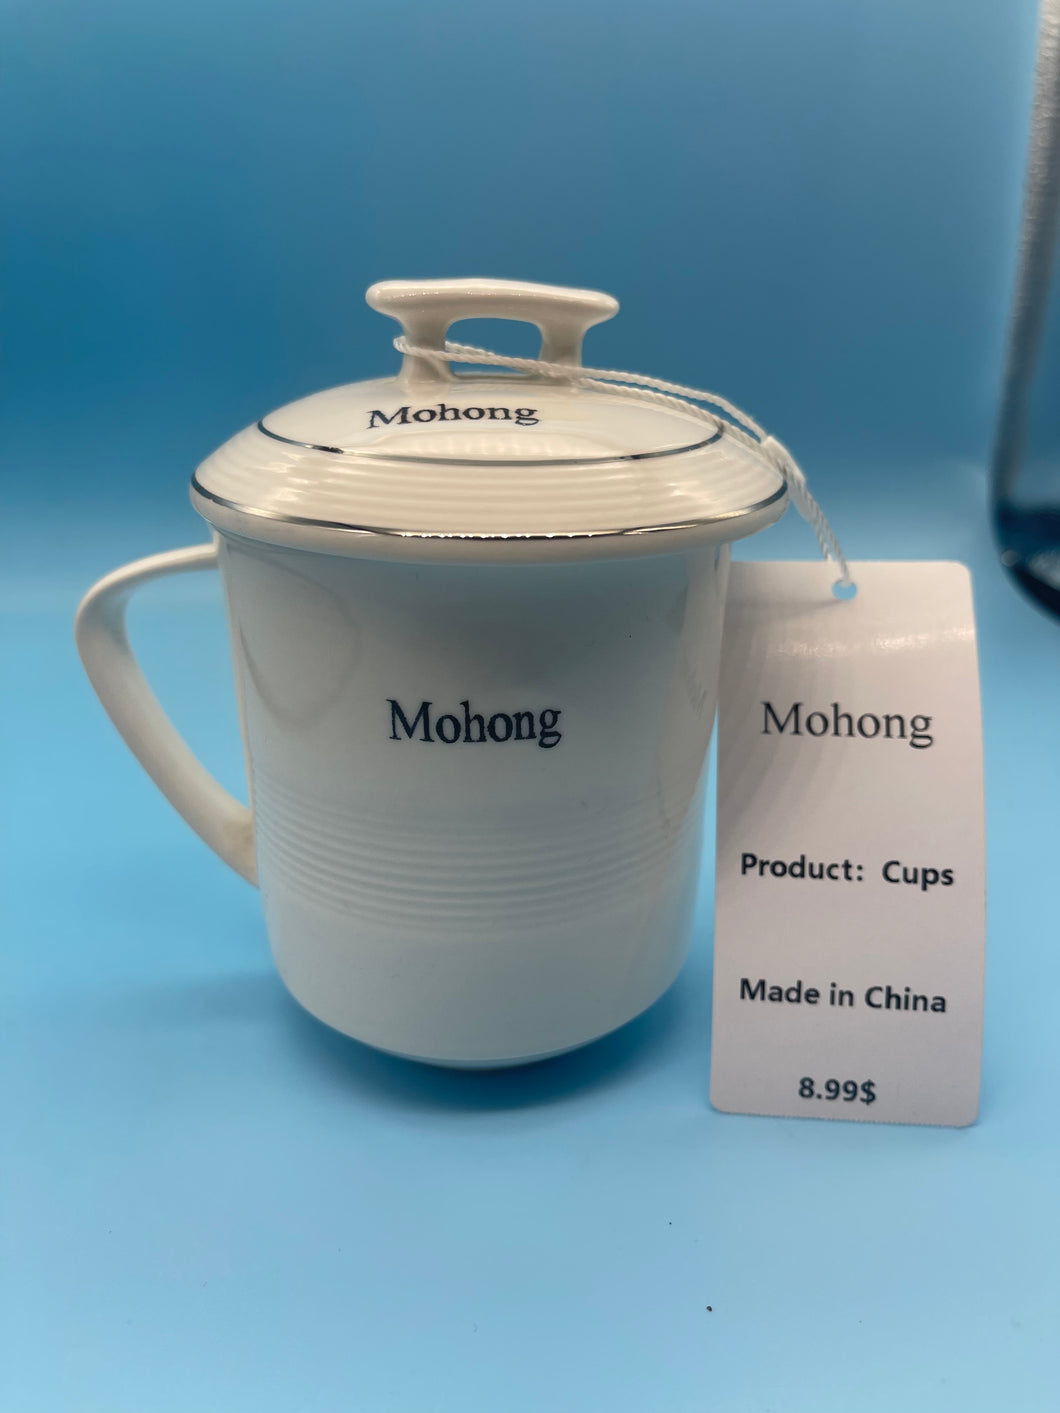 Mohong Cups, Ceramic Mug, Fancy Tea Cup with Silver Trim, China Tea Cups with Lid, Flower Tea Cup, Suitable for Making Tea, Cold Drinks, Hot Drinks, Coffee, Etc, 10oz (about 300ml), Set of 2